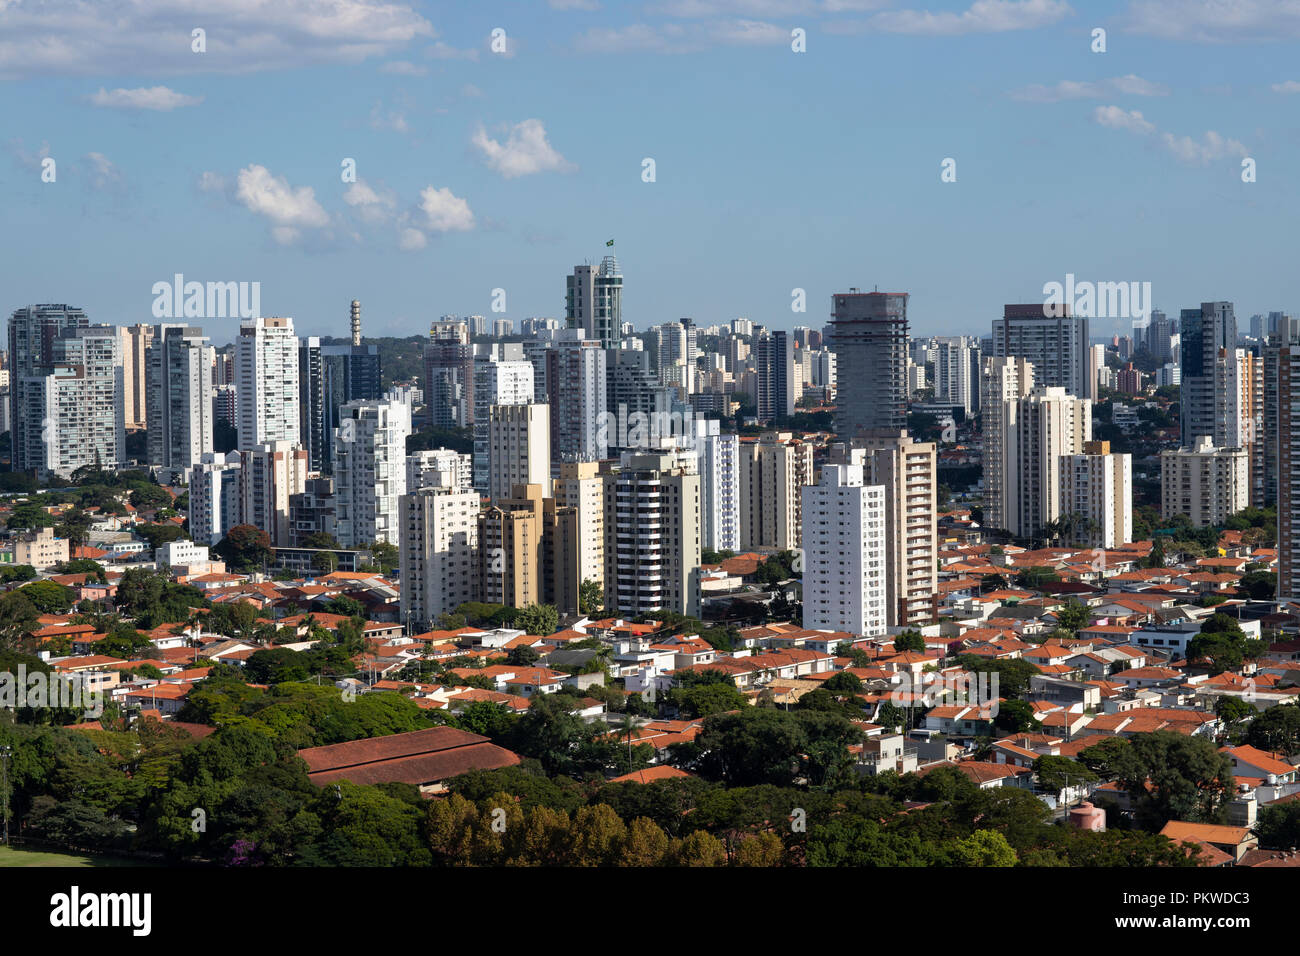 Big city by the world. The city with its houses and buildings. Stock Photo